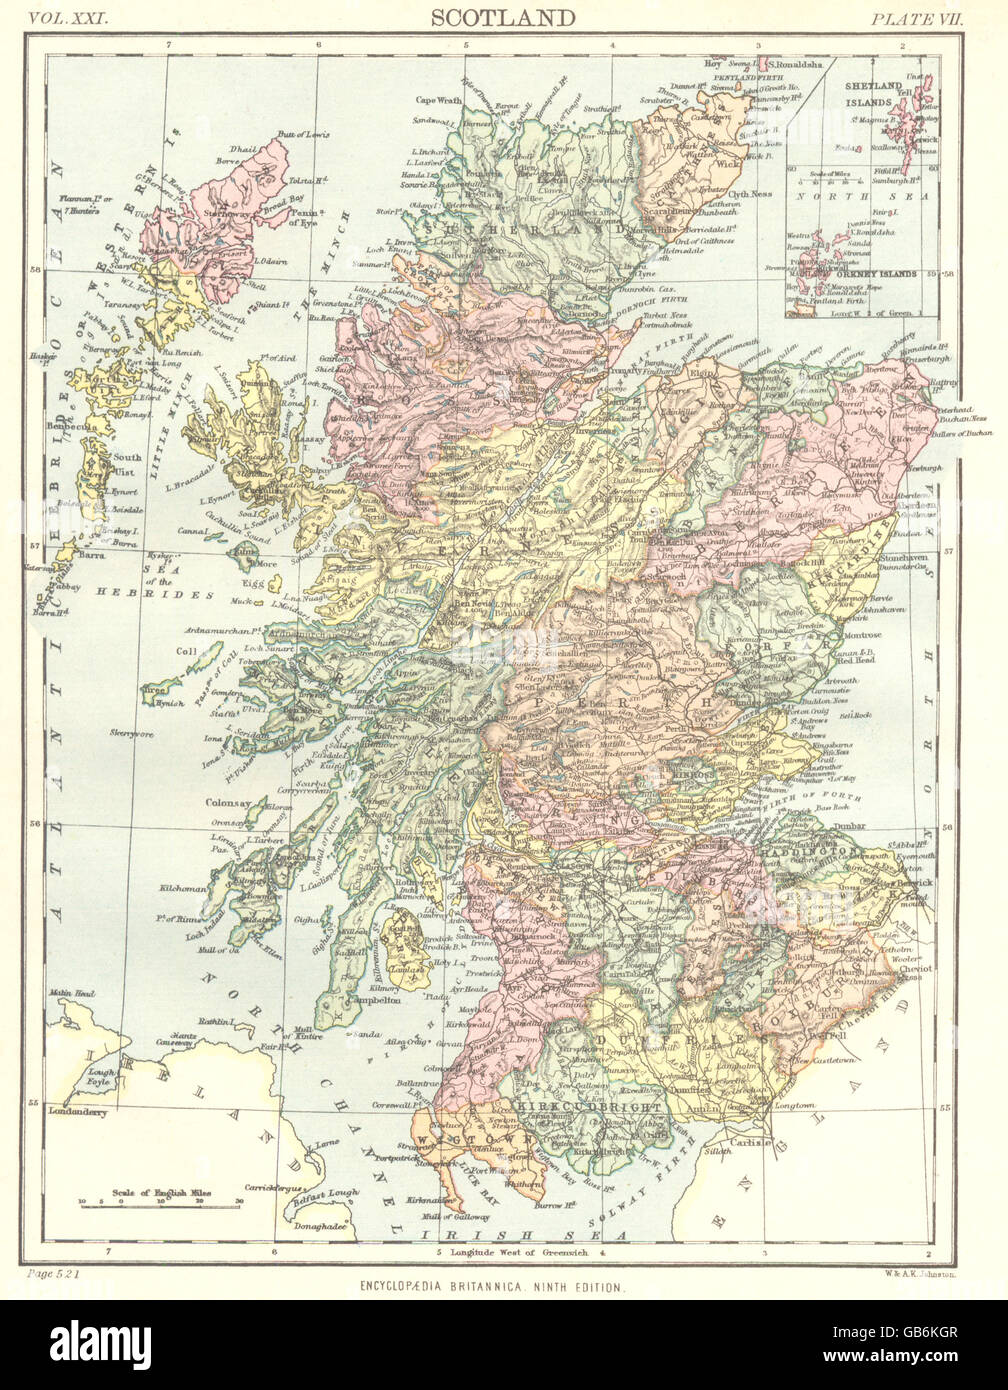 SCOTLAND: Showing counties. Britannica 9th edition, 1898 antique map Stock Photo